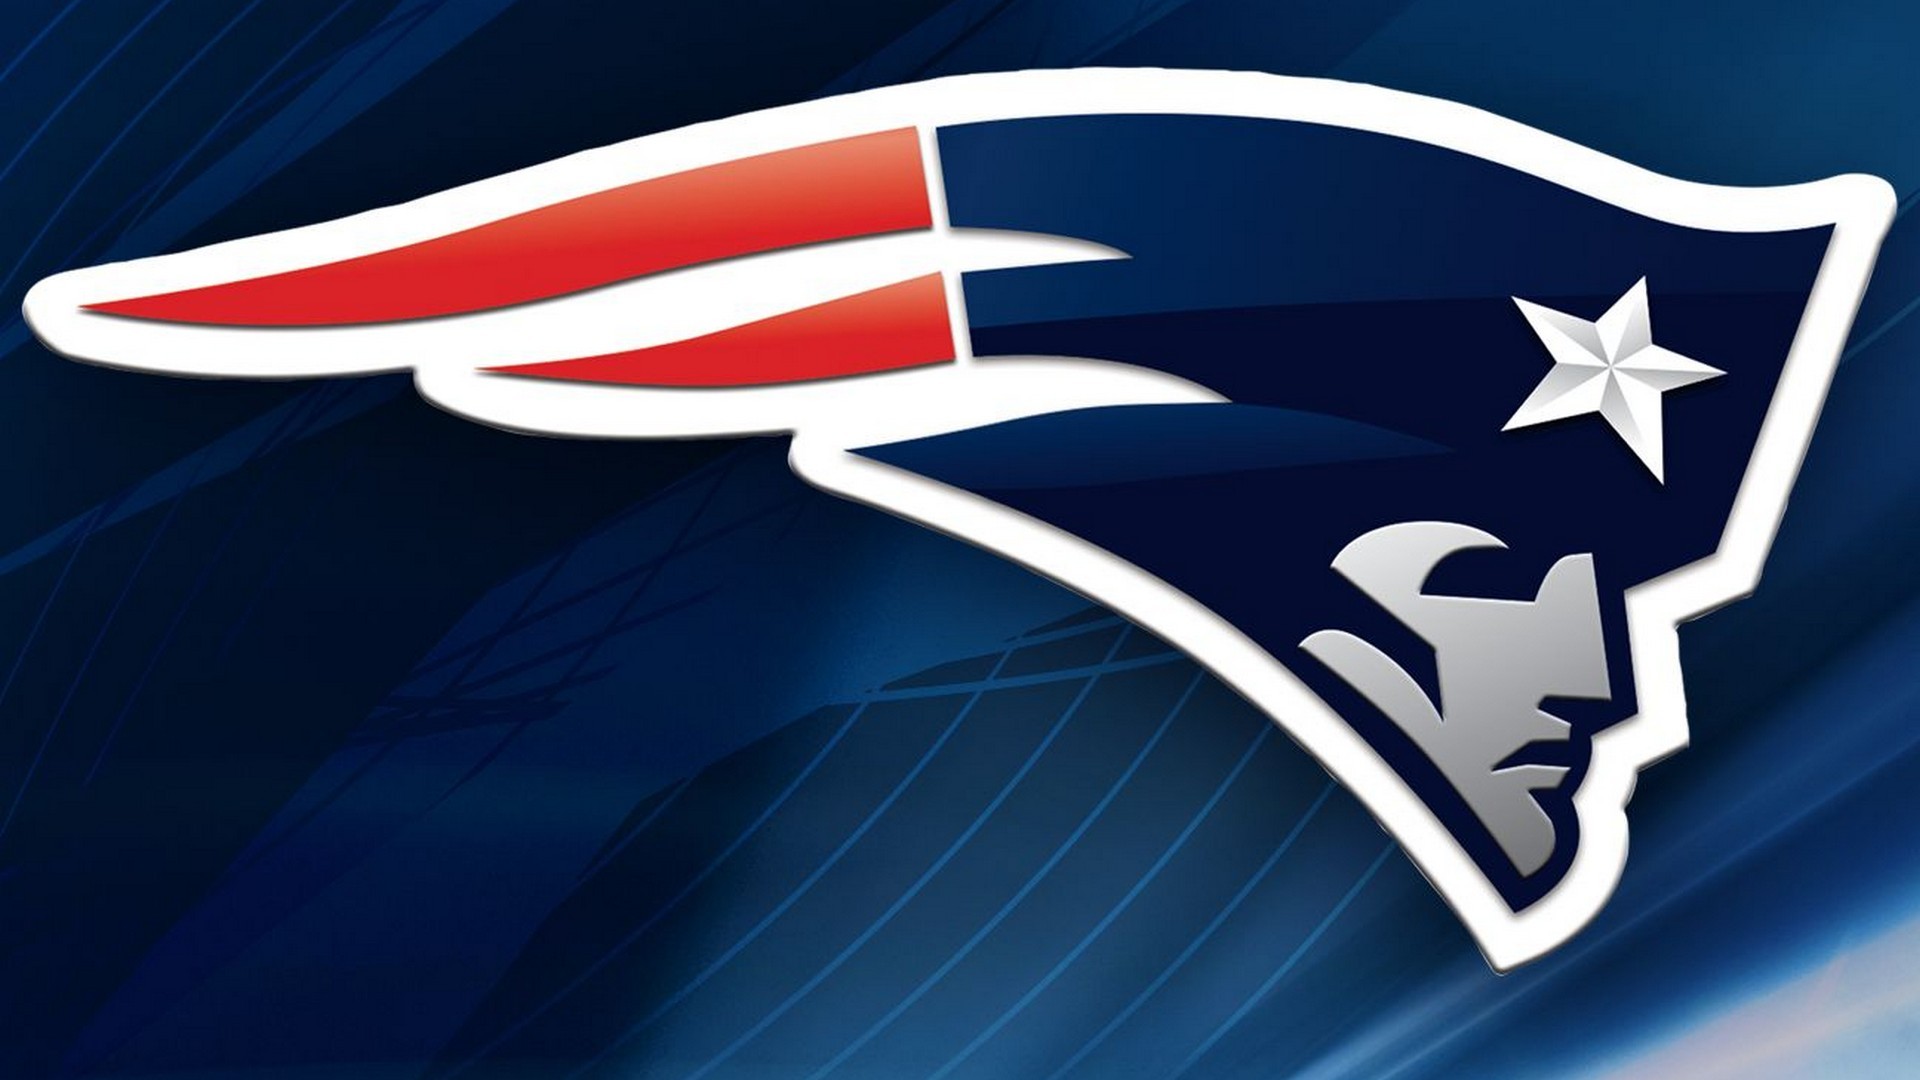 Wallpaper Desktop New England Patriots NFL HD with high-resolution 1920x1080 pixel. You can use this wallpaper for your Mac or Windows Desktop Background, iPhone, Android or Tablet and another Smartphone device